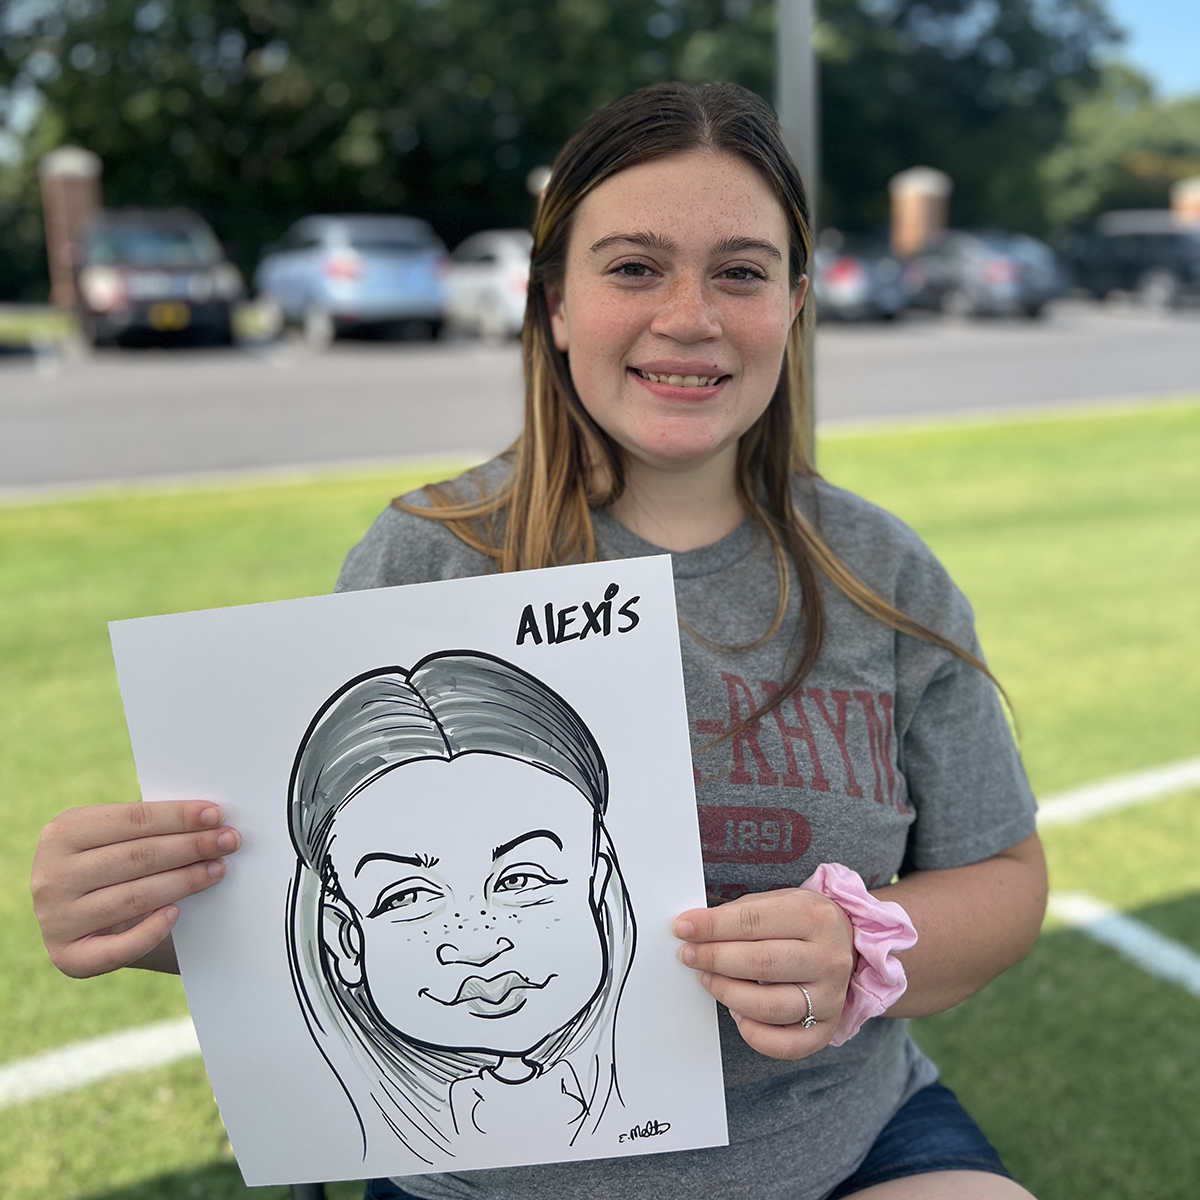 College freshman girl with caricature.